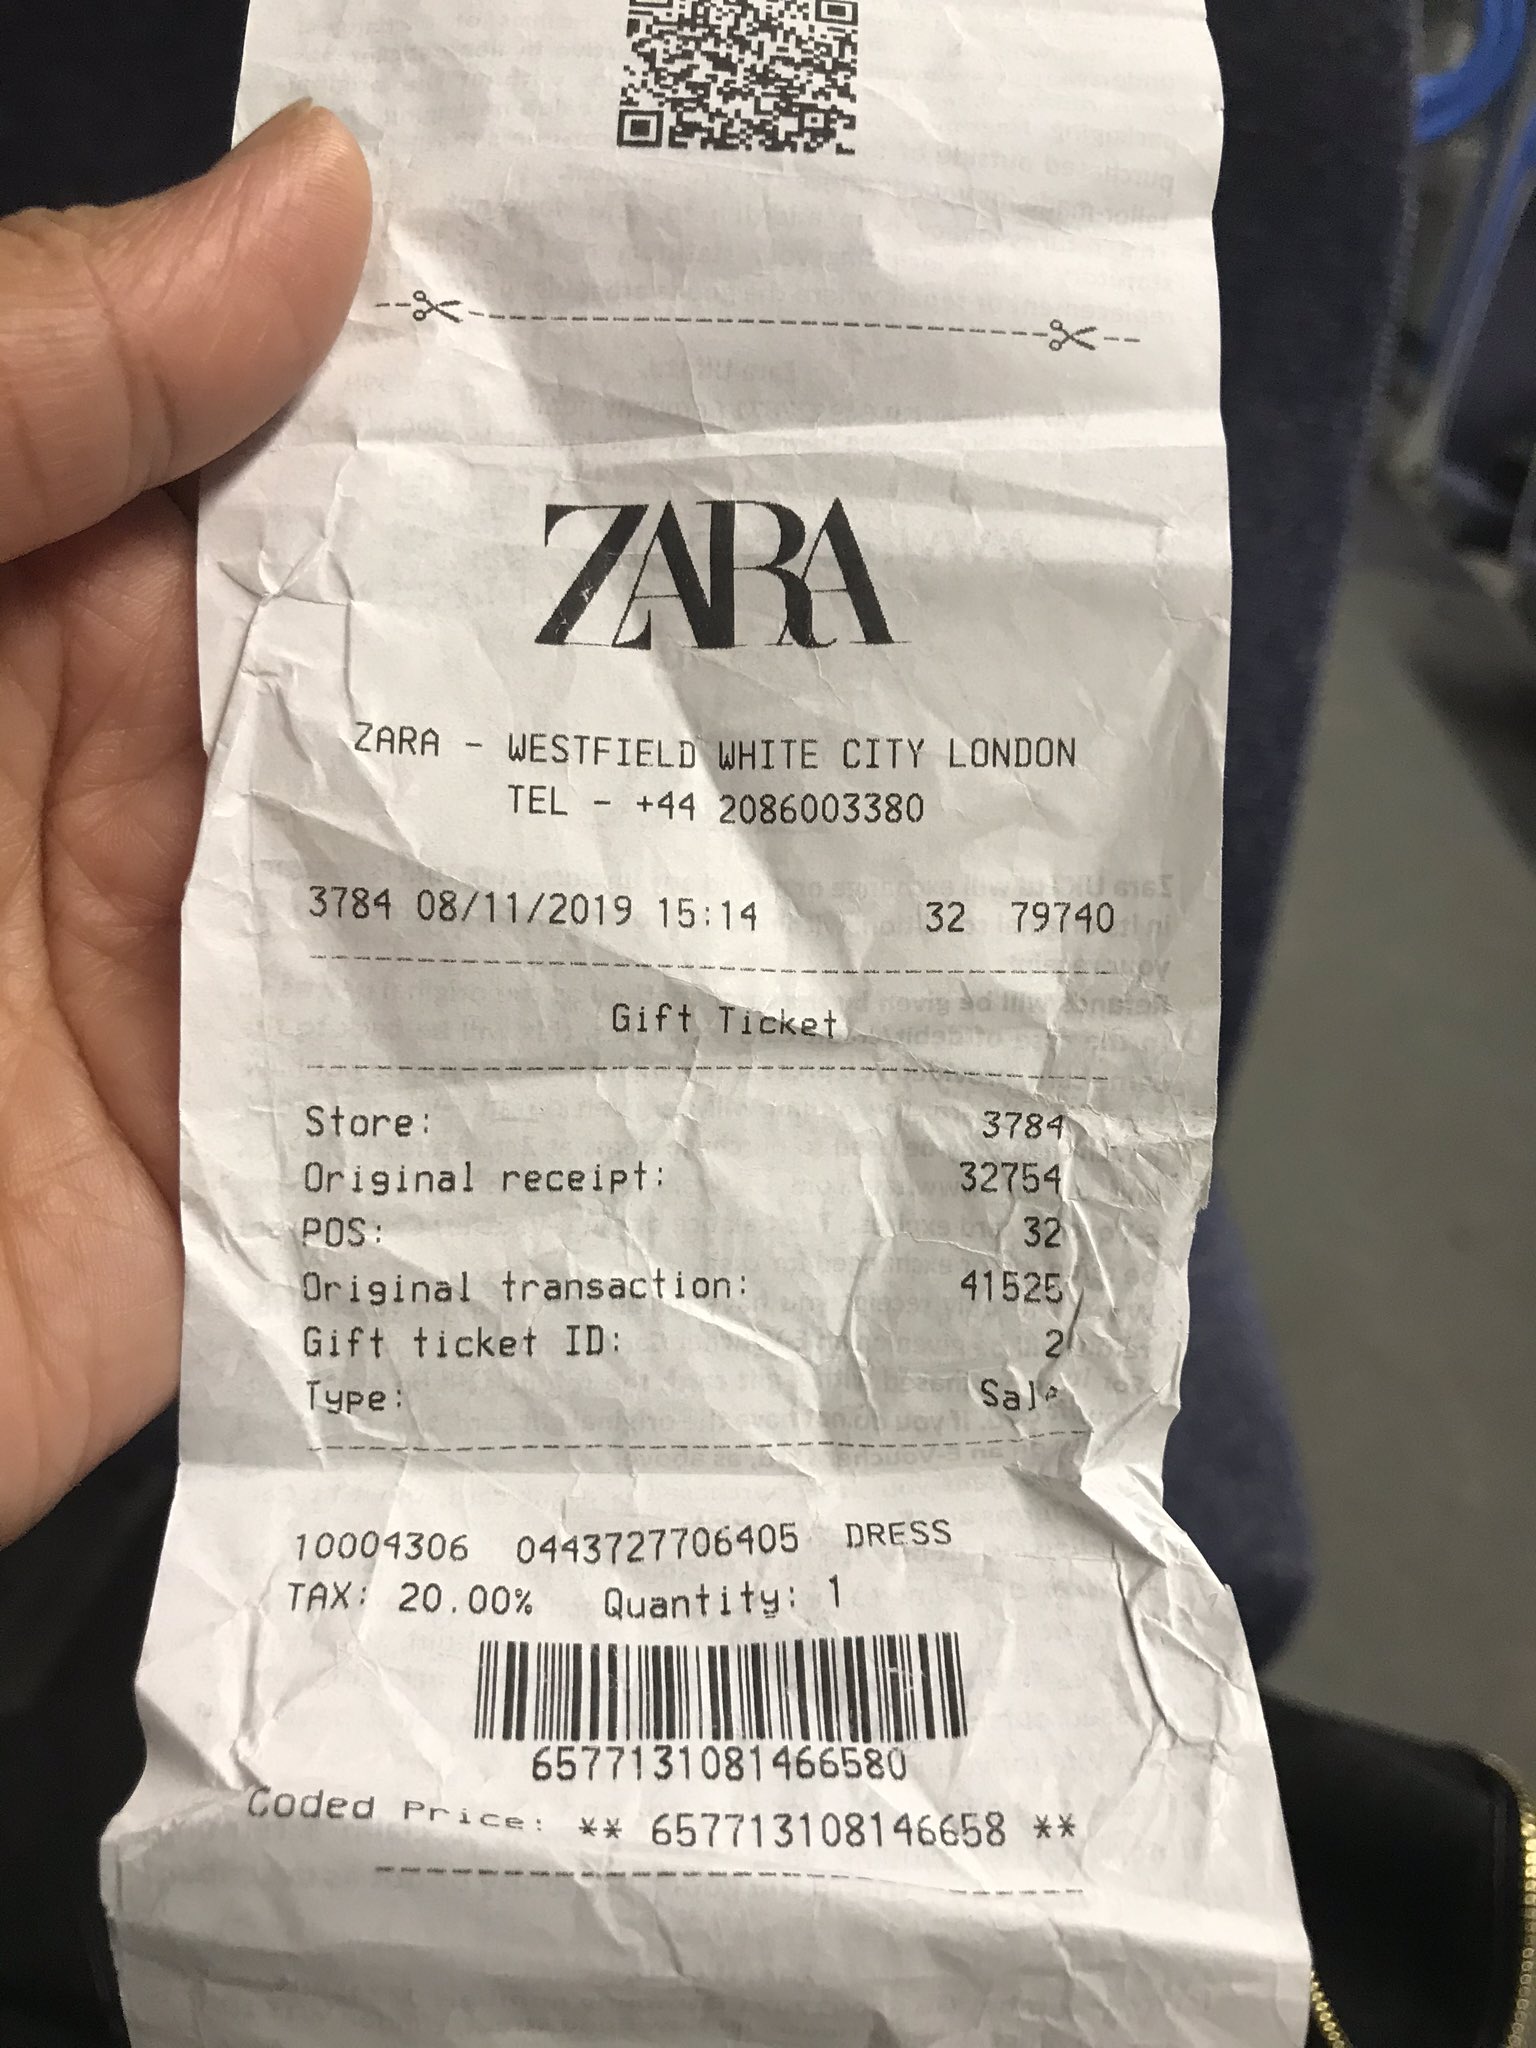 PRETH RAO on X: "@ZARA_Care I have been trying to get a refund for some  clothes I bought on 8/11/19 where your staff at Westfield Shepherds Bush  accidentally gave me a gift